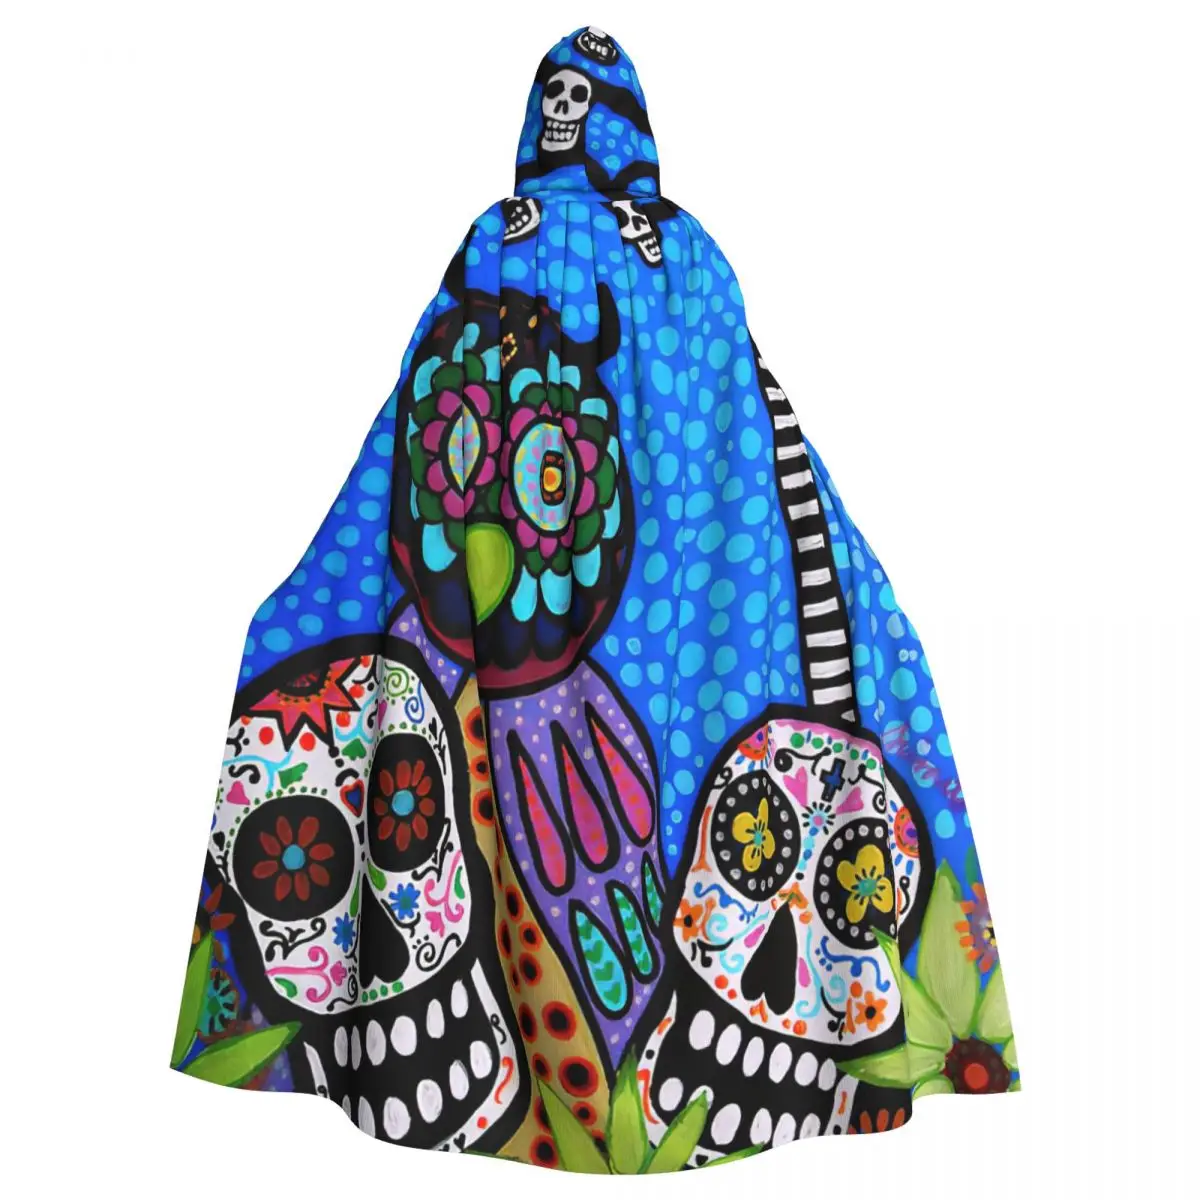 

Owl And Sugar Day Of The Dead Art Print Hooded Cloak Halloween Party Cosplay Woman Men Adult Long Witchcraft Robe Hood